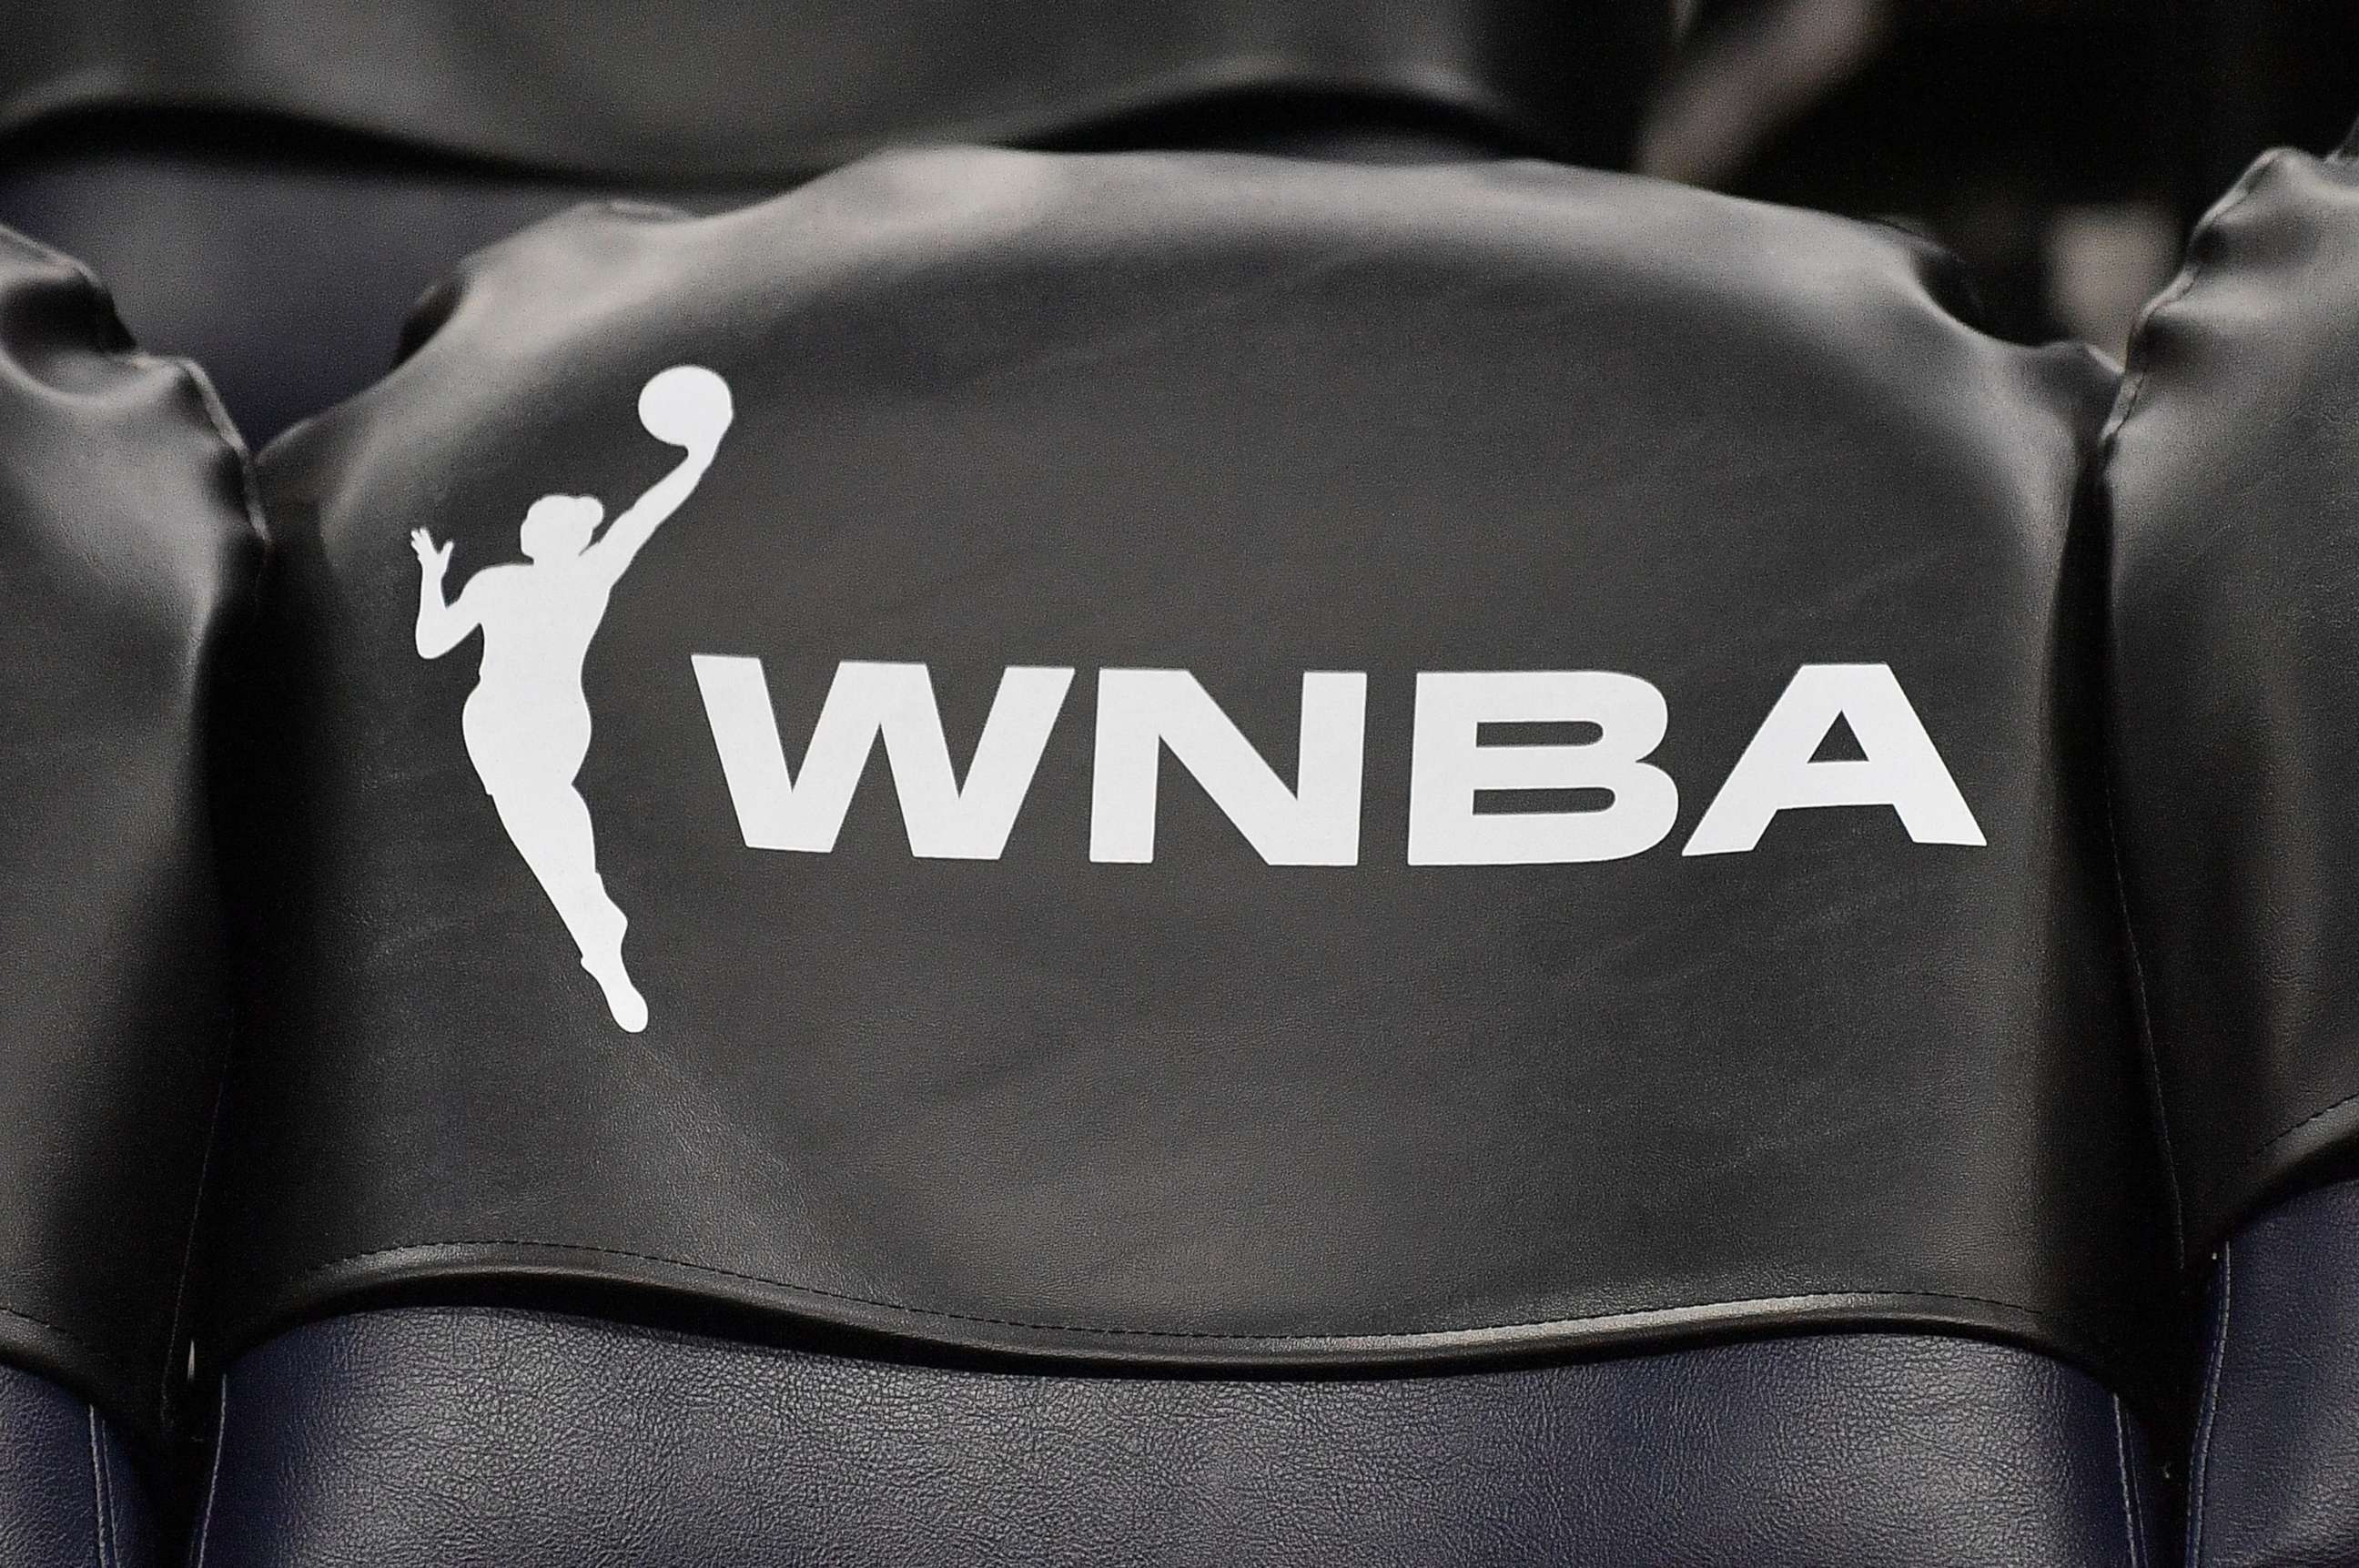 PHOTO: The WNBA logo is seen on a chair back during a game between the Minnesota Lynx and the Chicago Sky at Target Center, May 25, 2019, in Minneapolis.